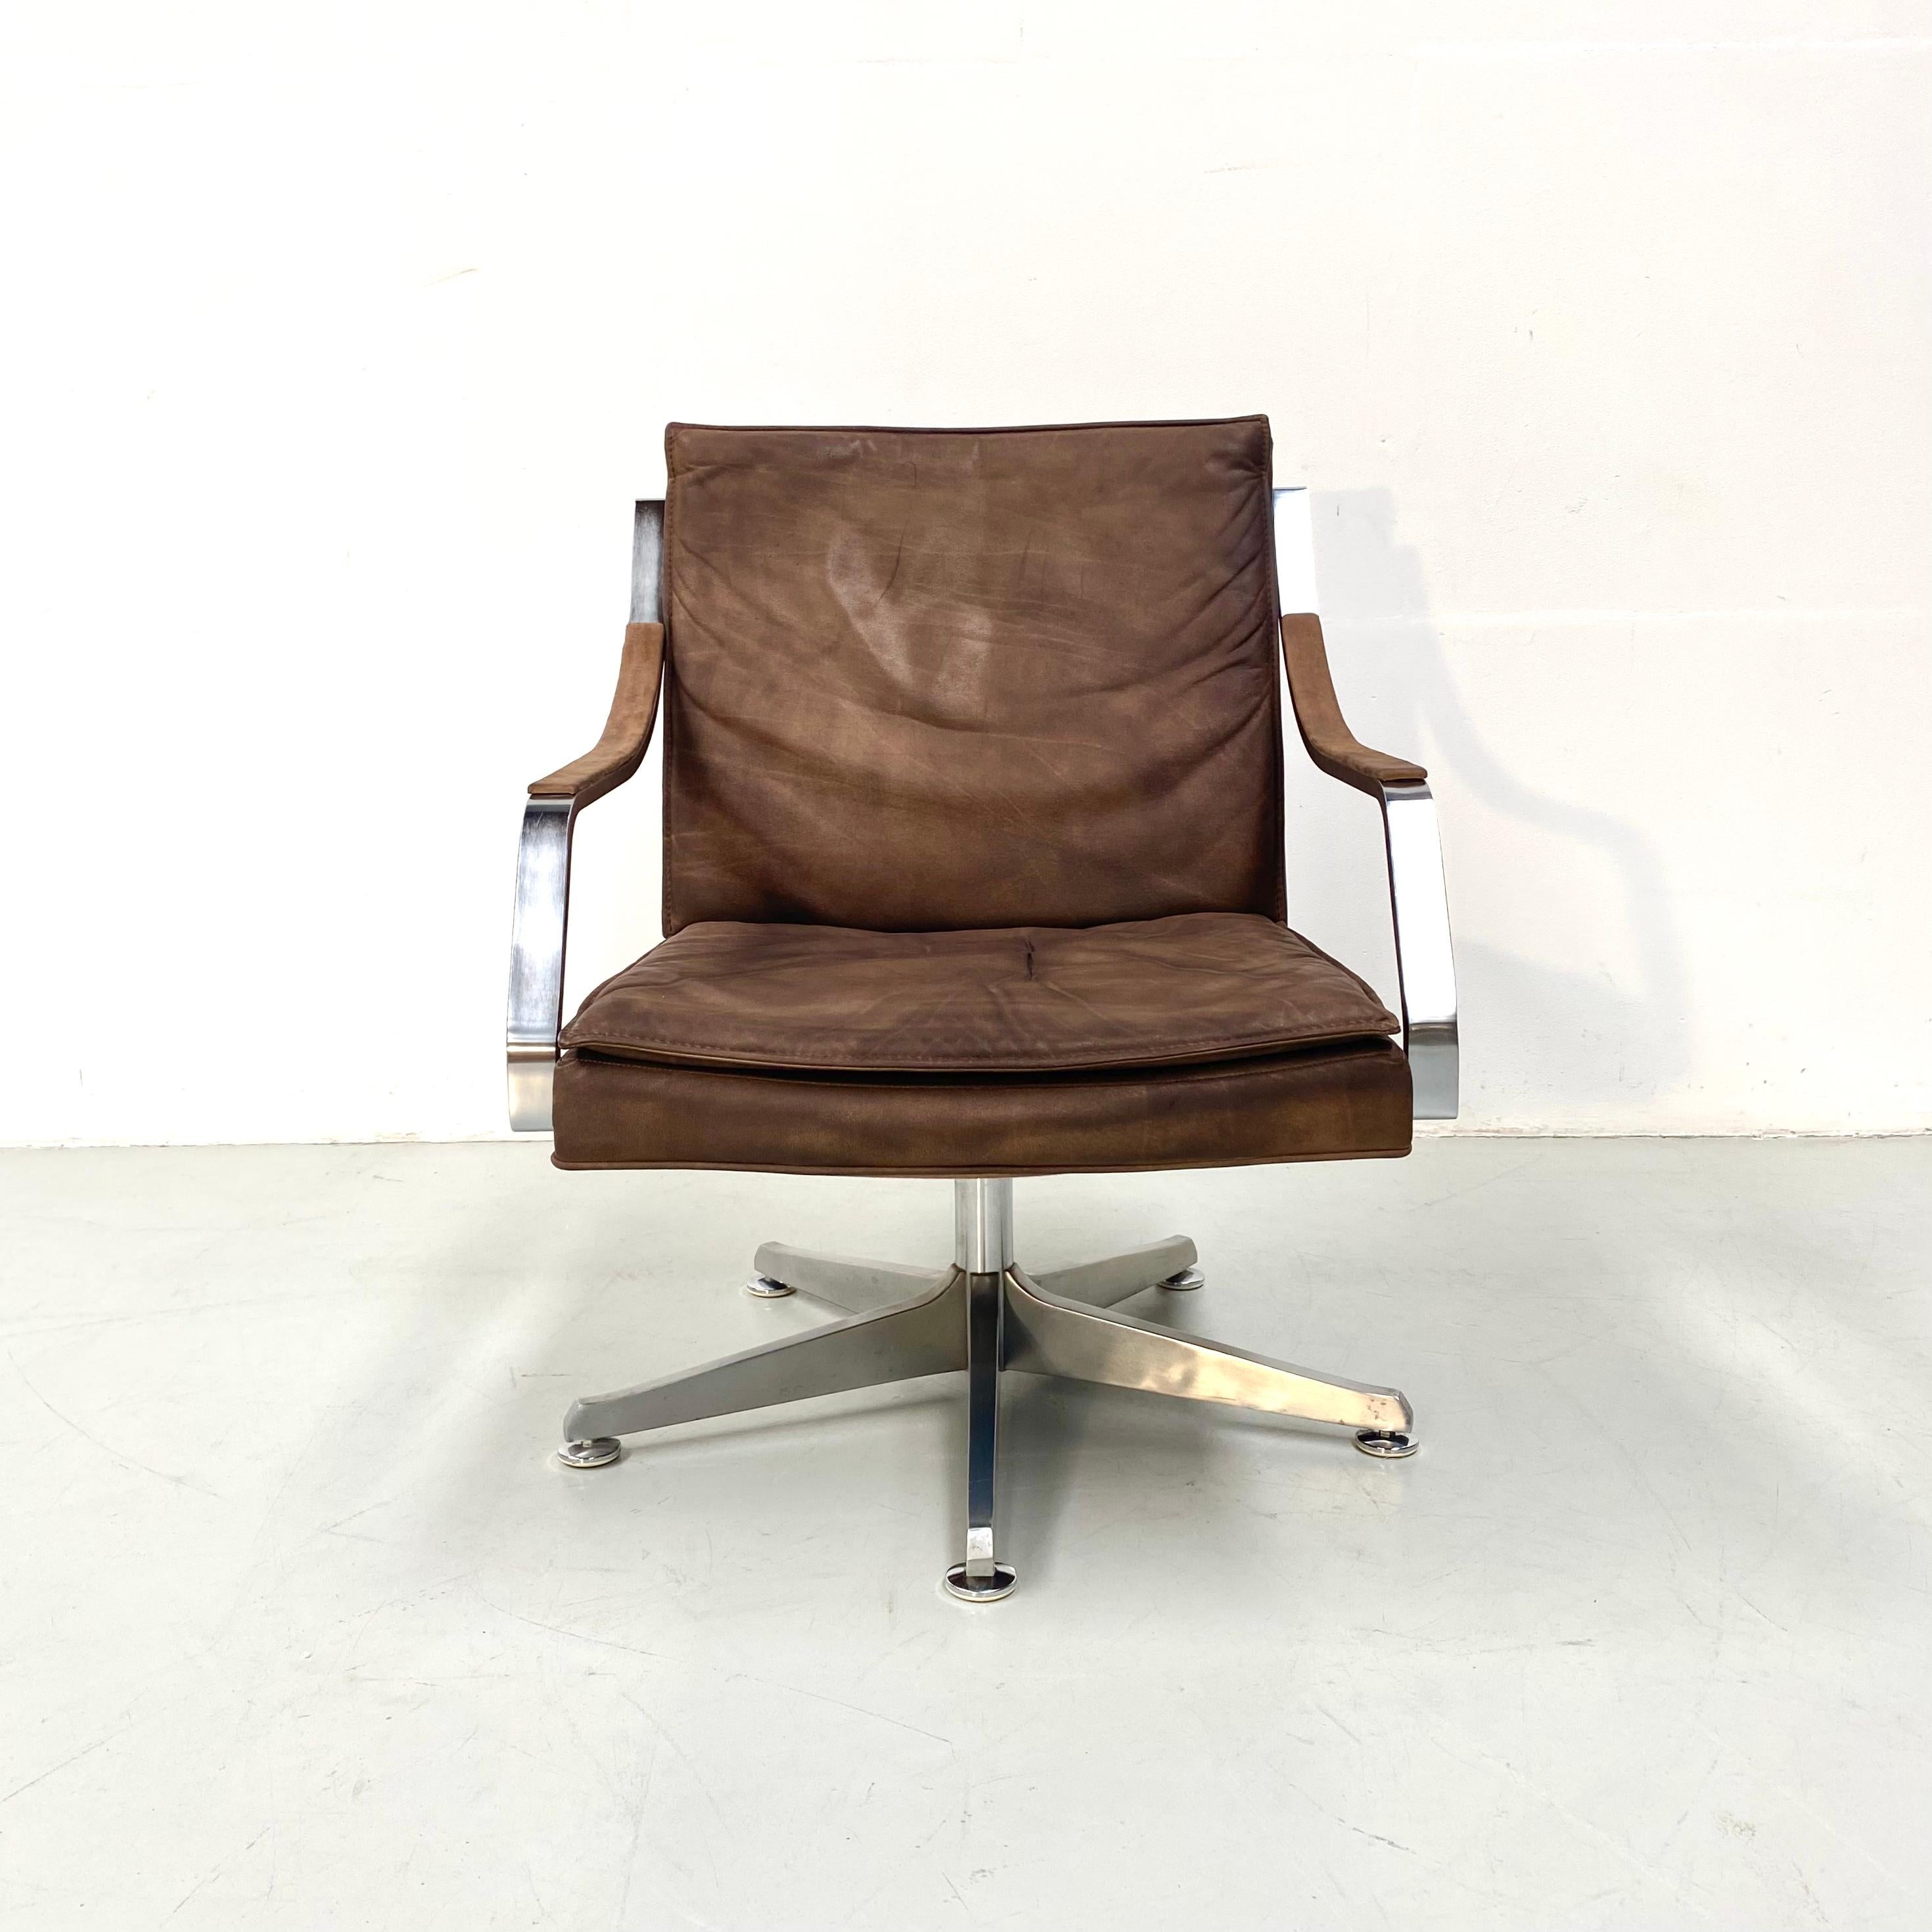 Vintage German Cantilever Conference Chairs by  R. Glatzel for Knoll, 1980s. 3